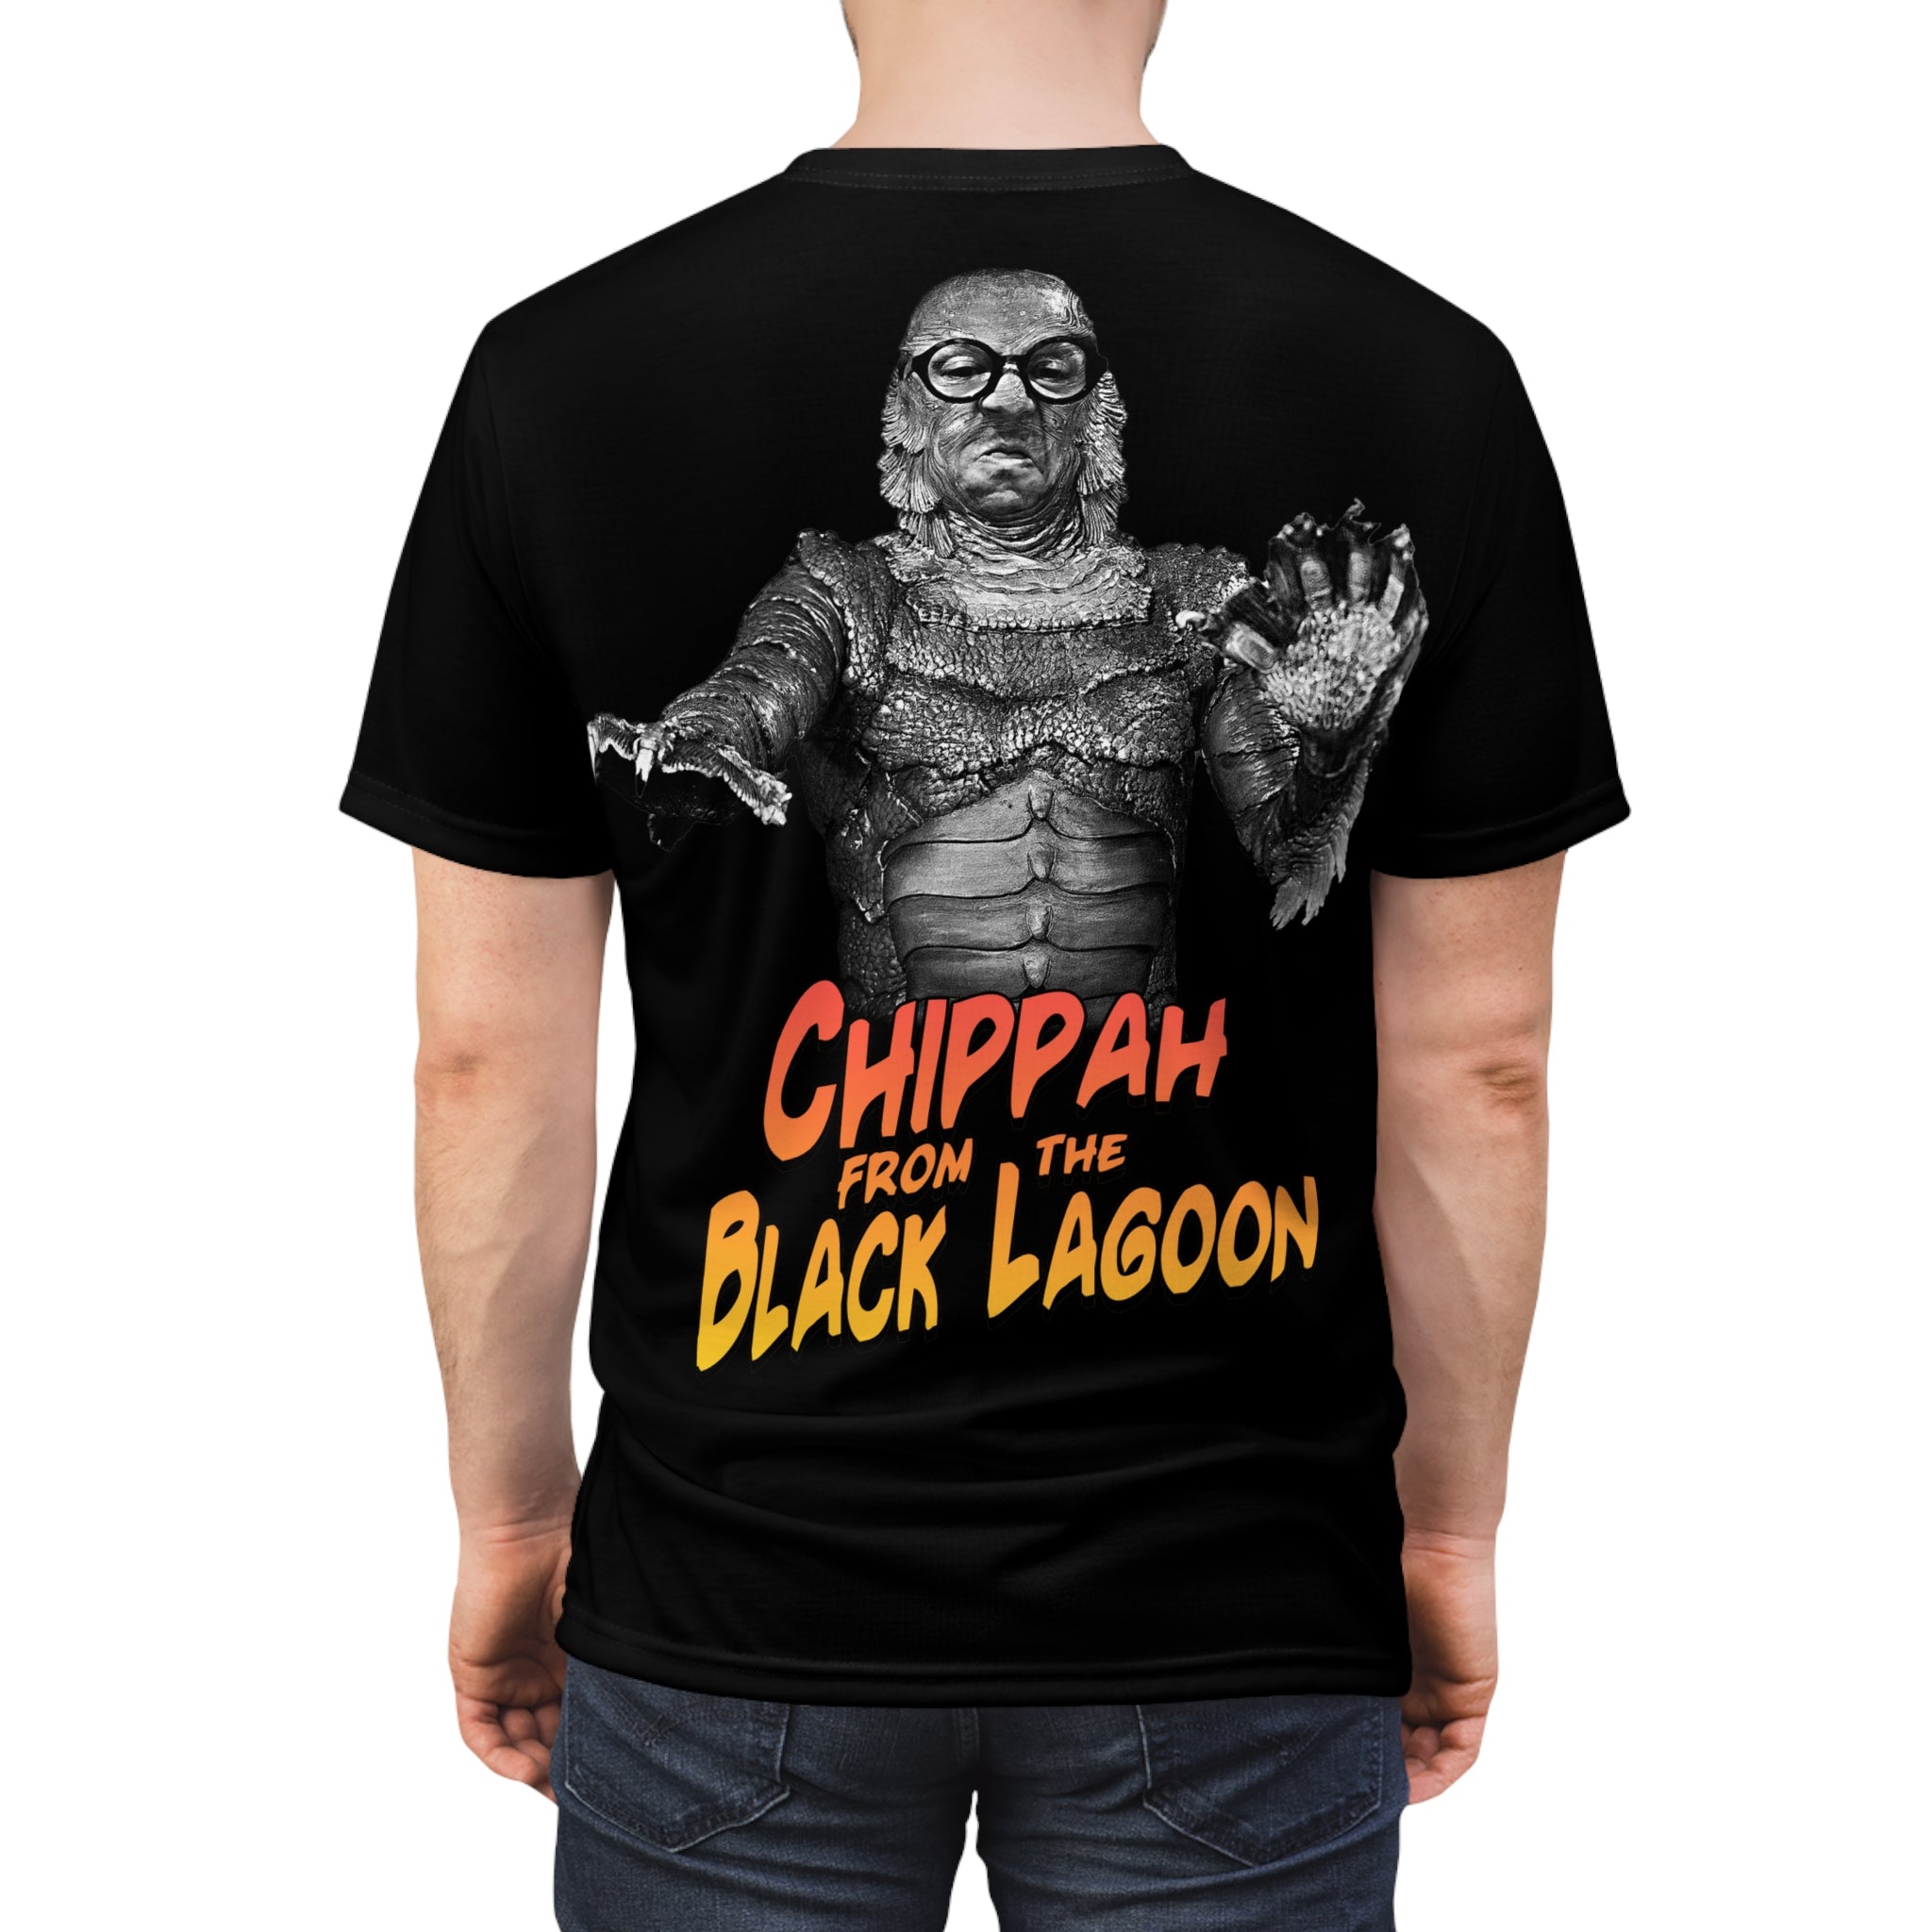 Chippah from the Black Lagoon All Over Print Shirt